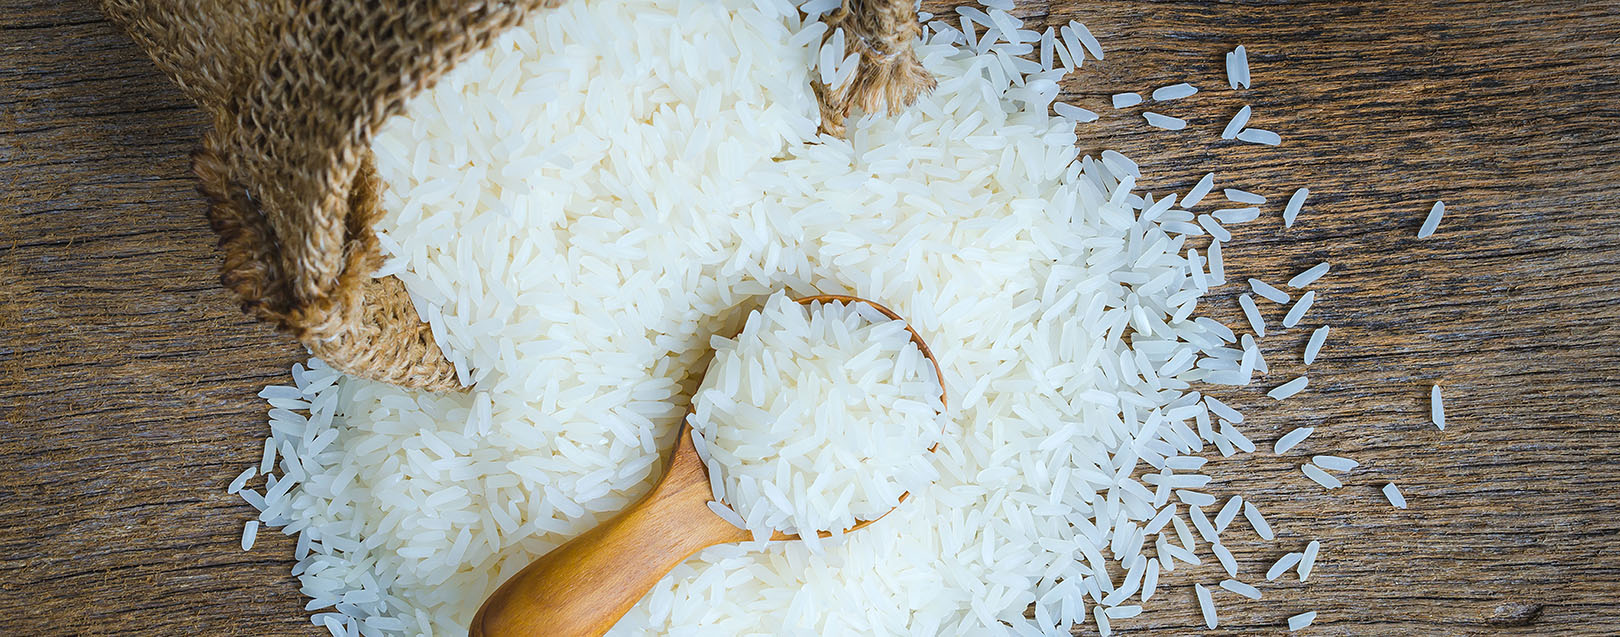 HUL completes its rice exports business sale with LT Foods